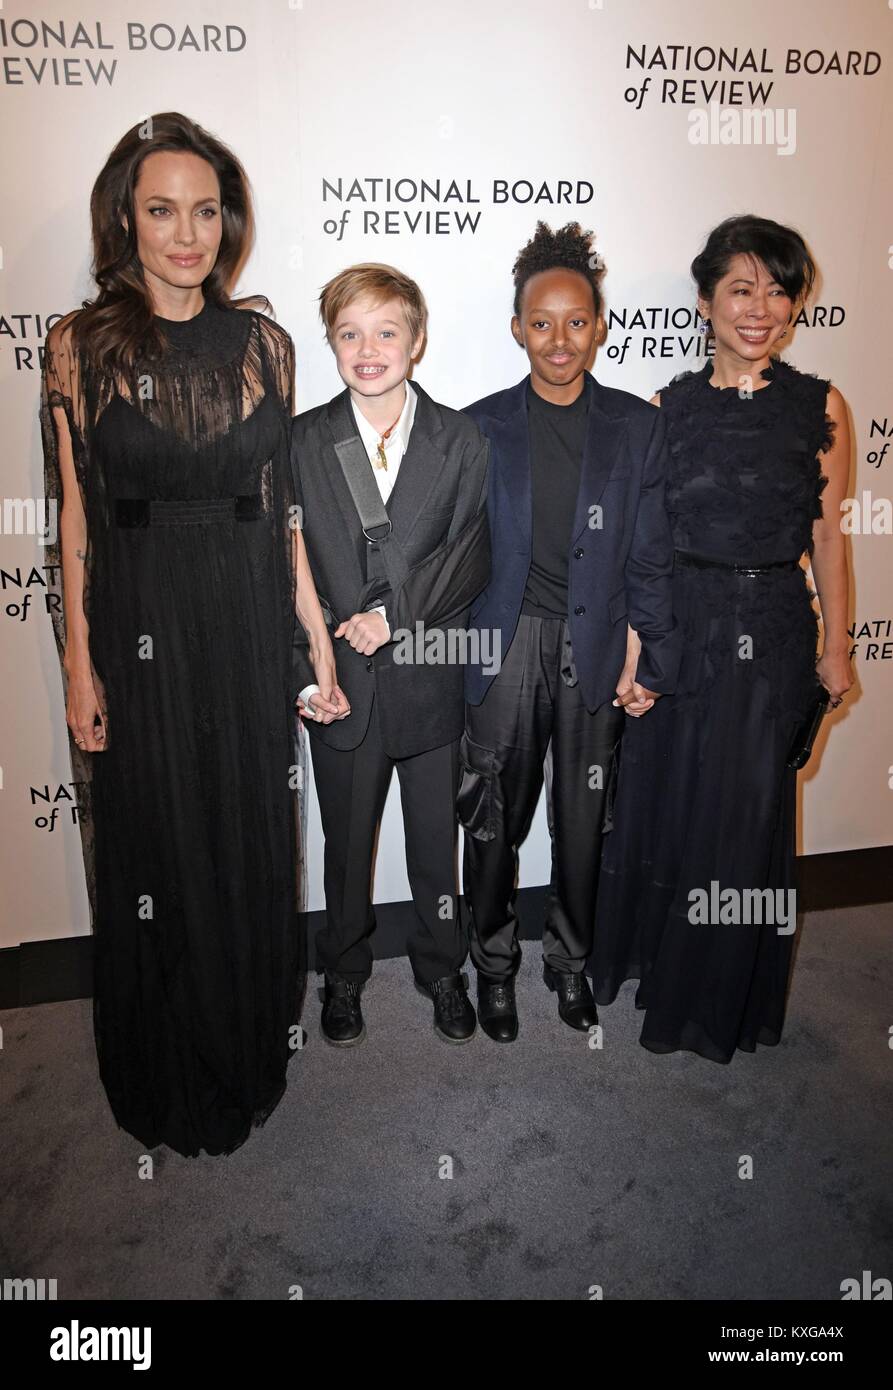 New York, NY, USA. 9th Jan, 2018. Angelina Jolie, Shiloh Nouvel Jolie-Pitt, Zahara Jolie-Pitt, Loung Ung at arrivals for The National Board of Review Awards 2018, Cipriani 42nd Street, New York, NY January 9, 2018. Credit: Derek Storm/Everett Collection/Alamy Live News Stock Photo